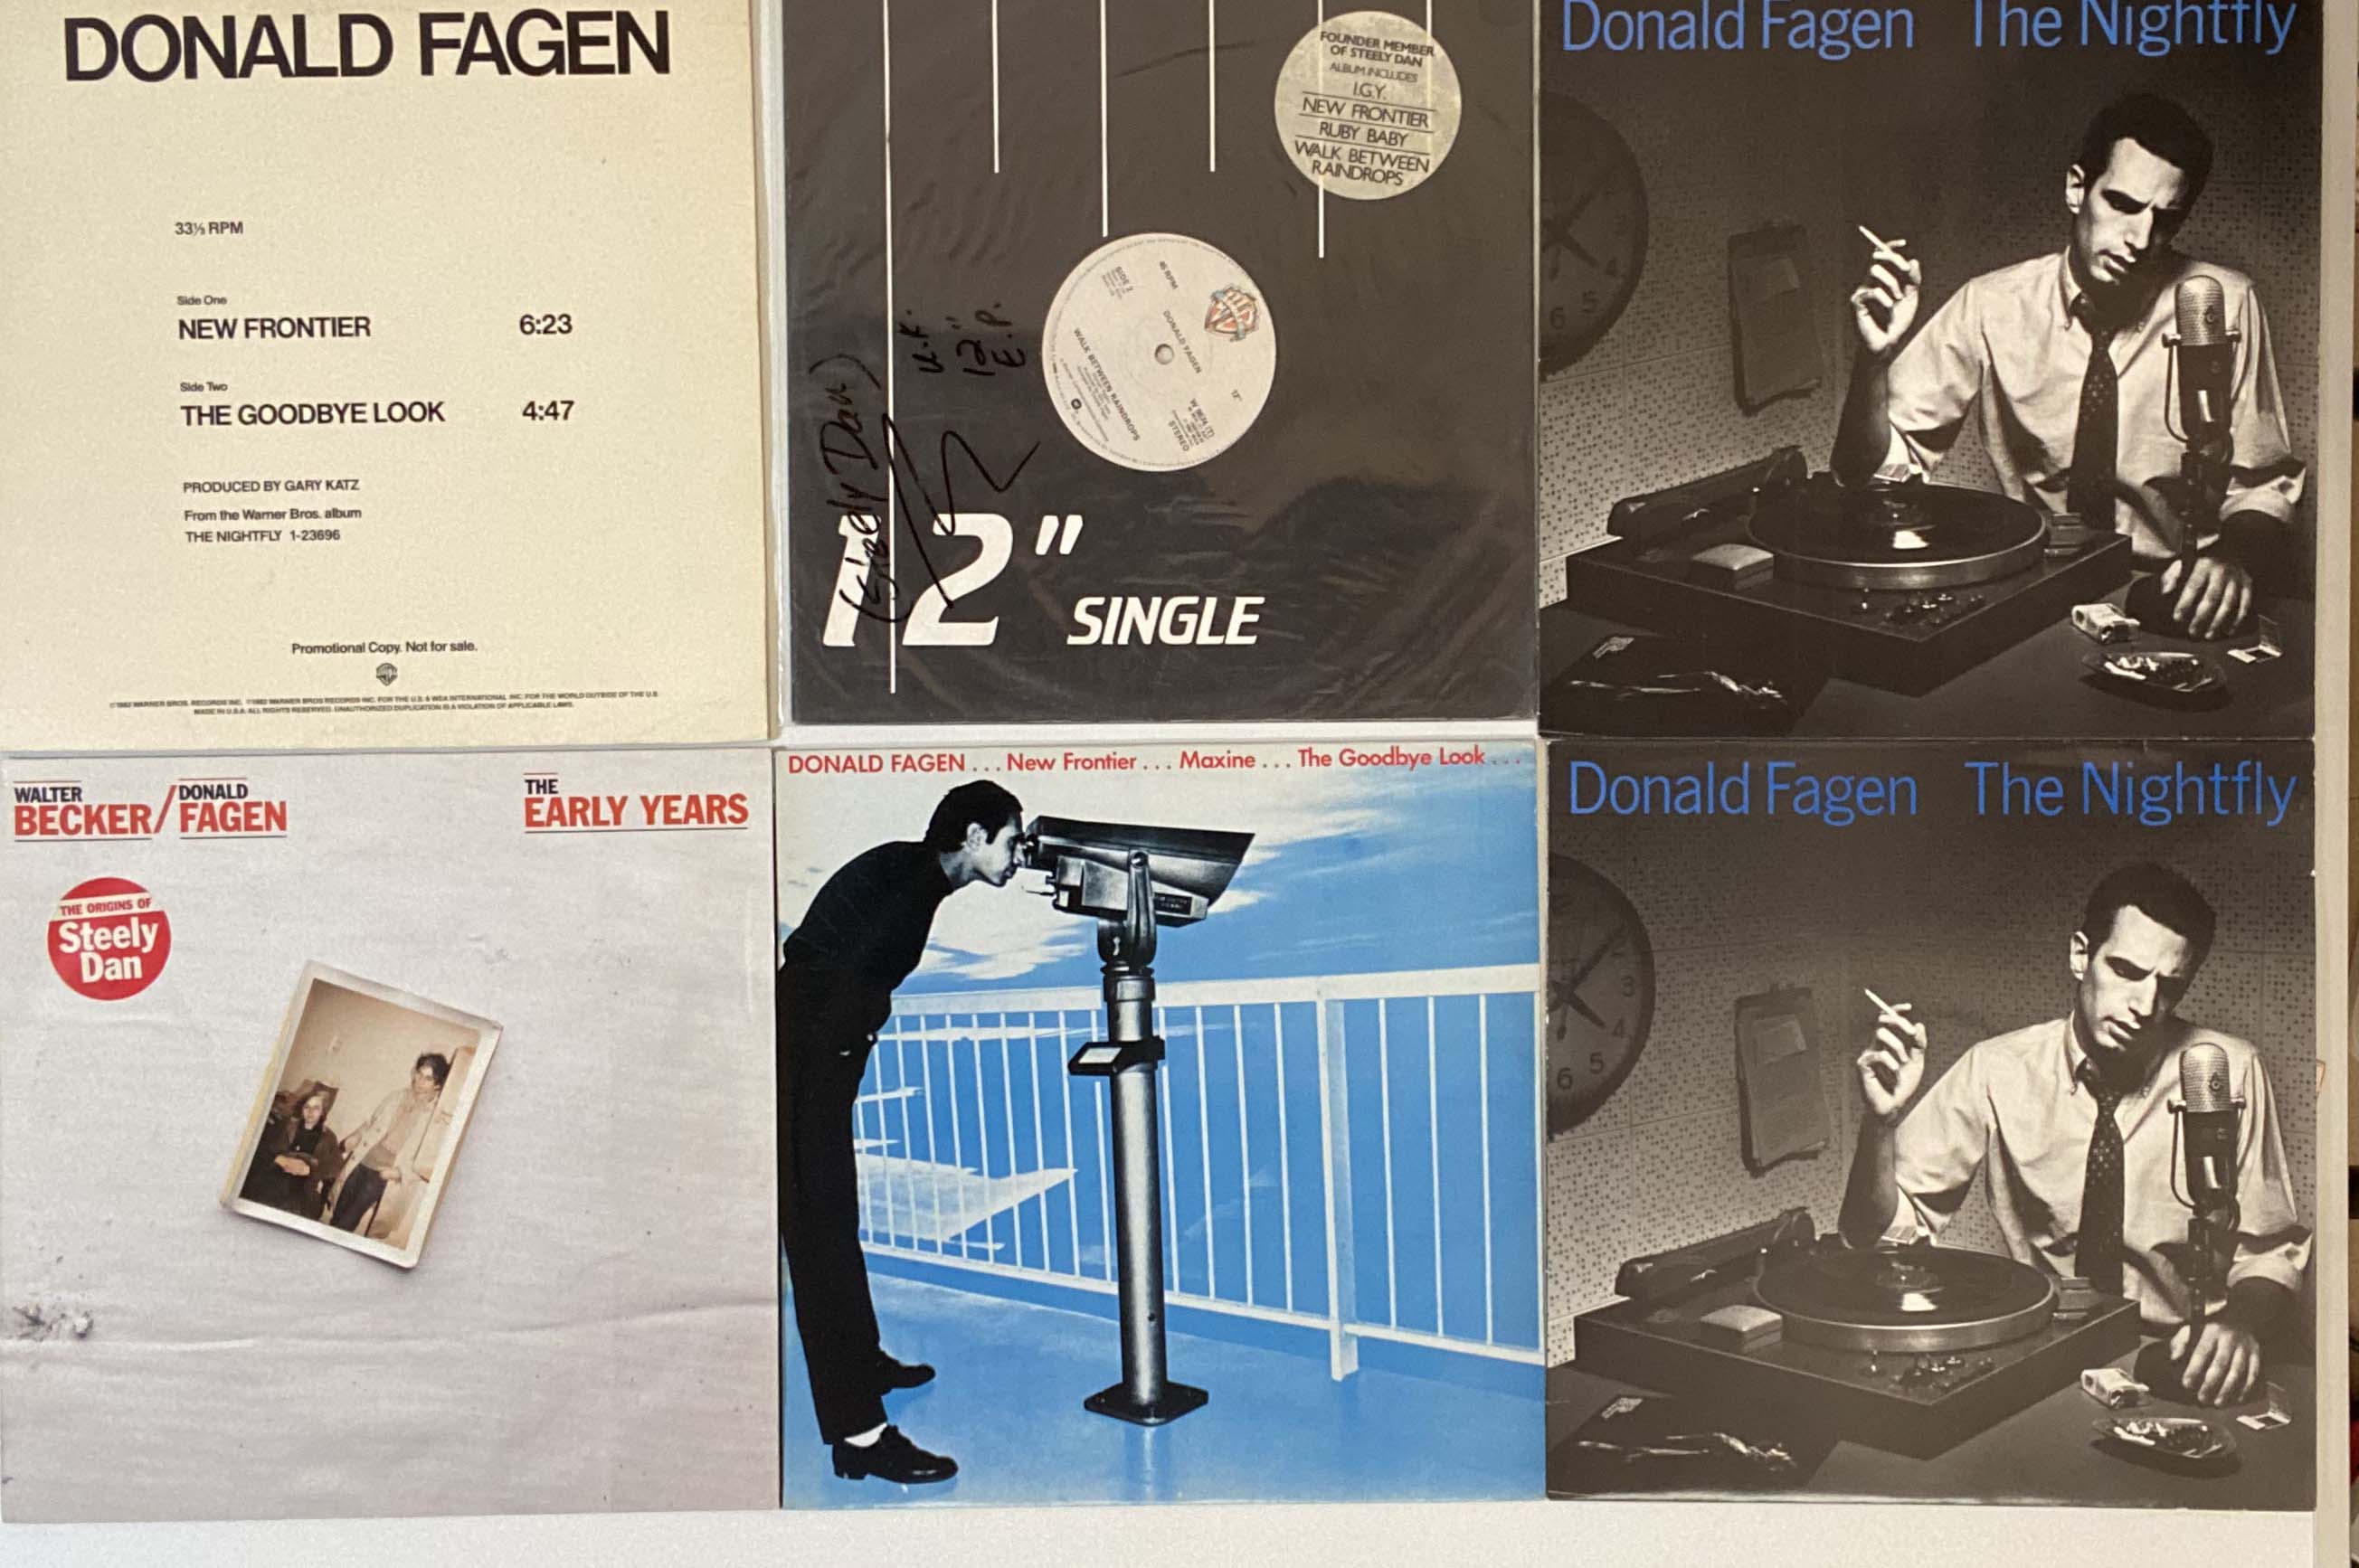 STEELY DAN/DONALD FAGEN - LP COLLECTION. - Image 4 of 6